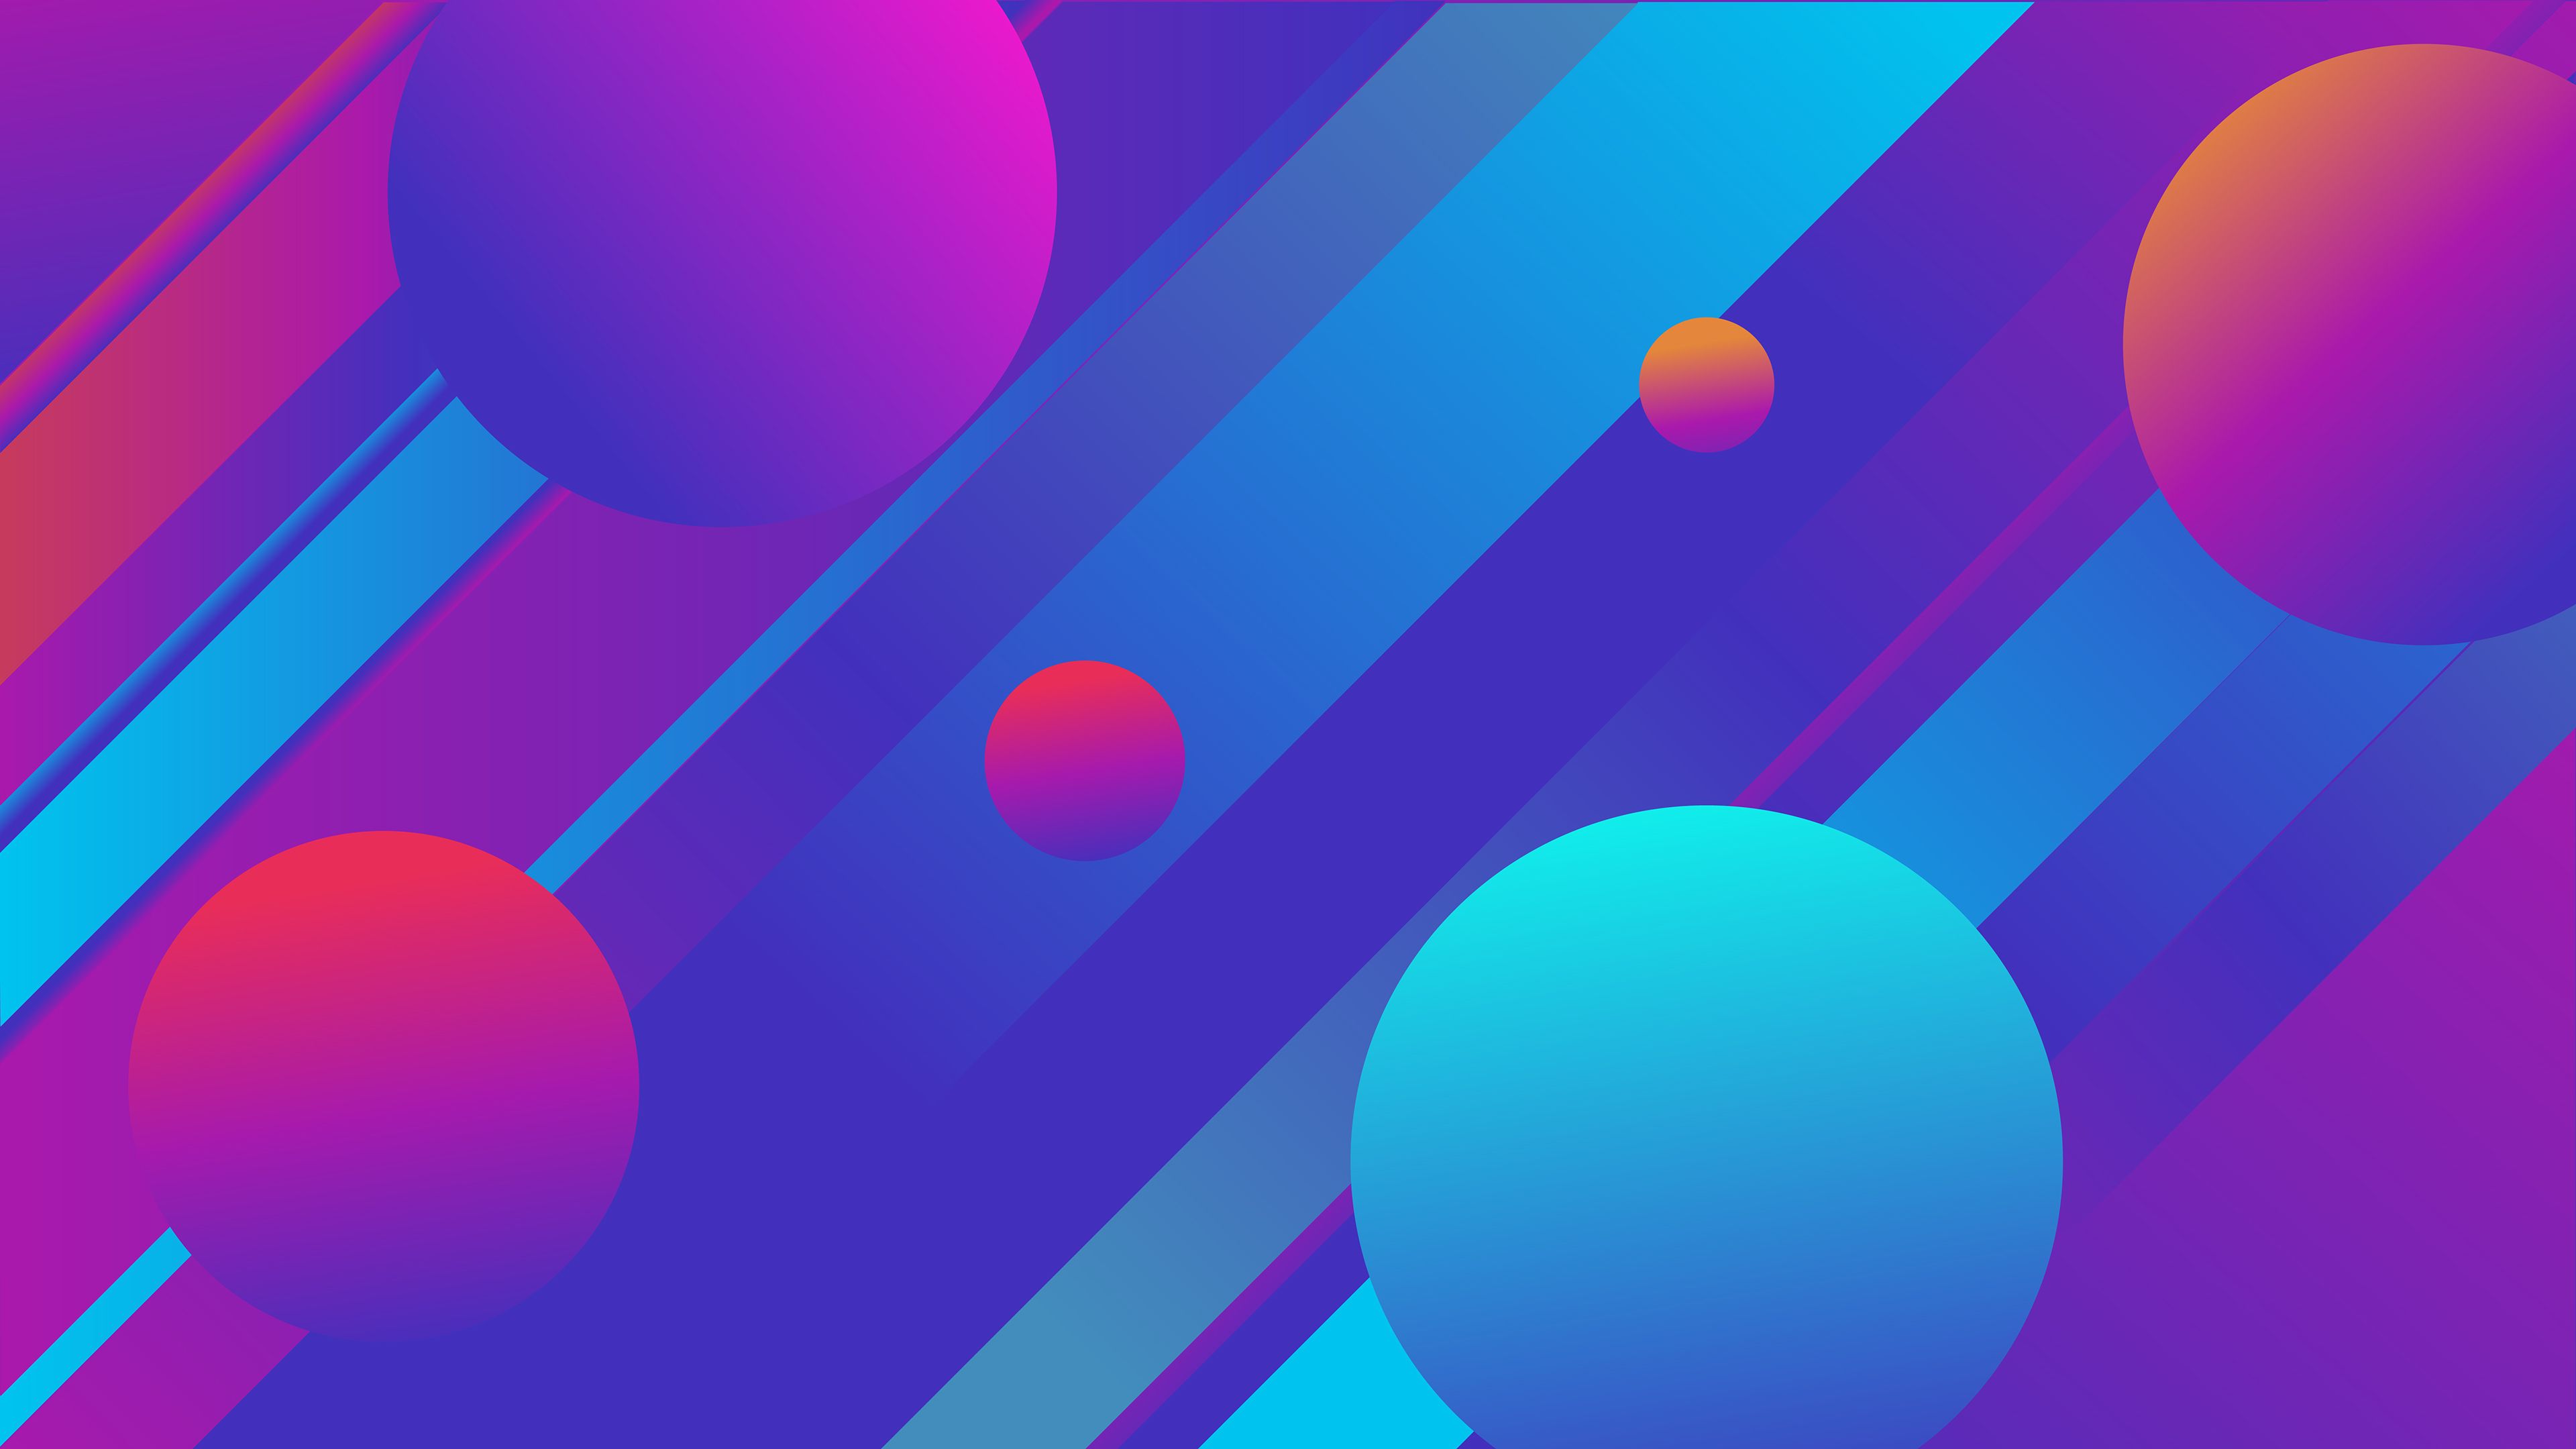 3D background Wallpaper 4K, Gradients, Colorful, Circles, Stripes, Abstract